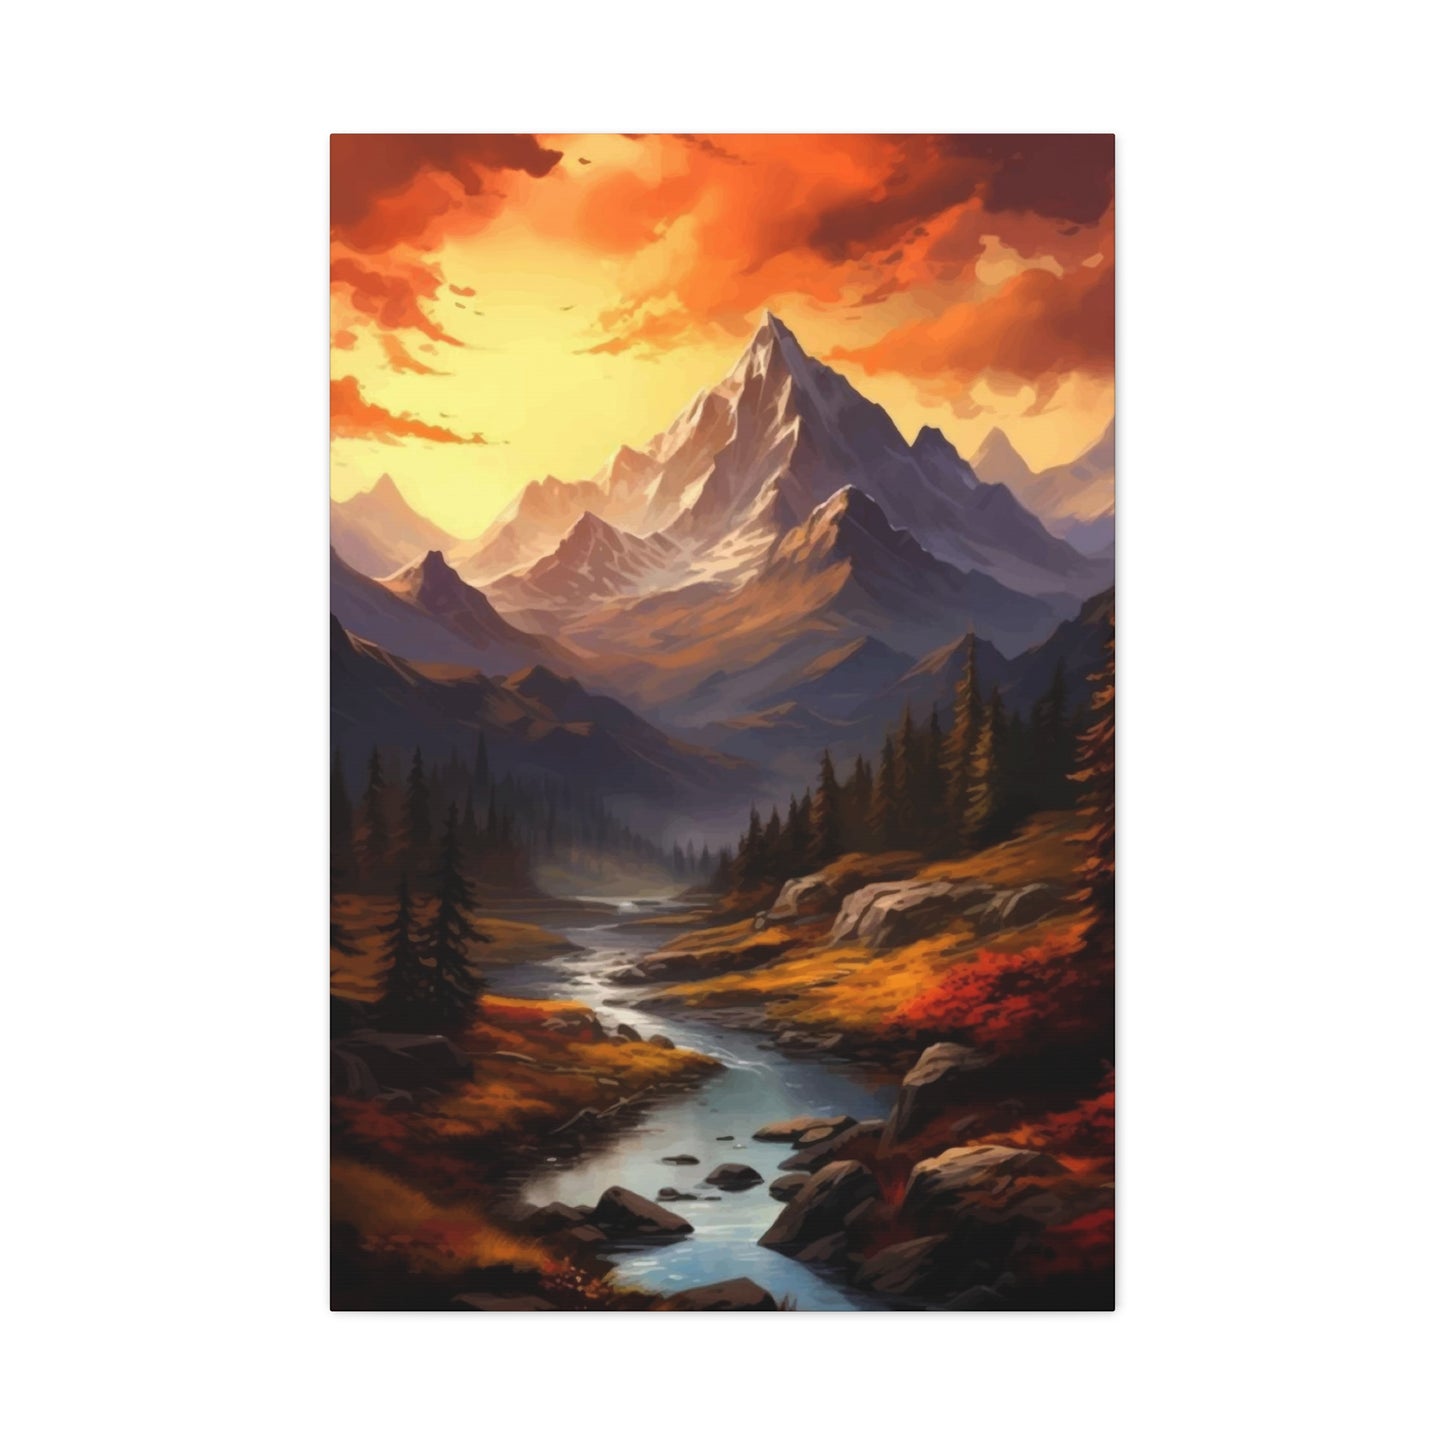 Stream from Mountain Wall Art & Canvas Prints